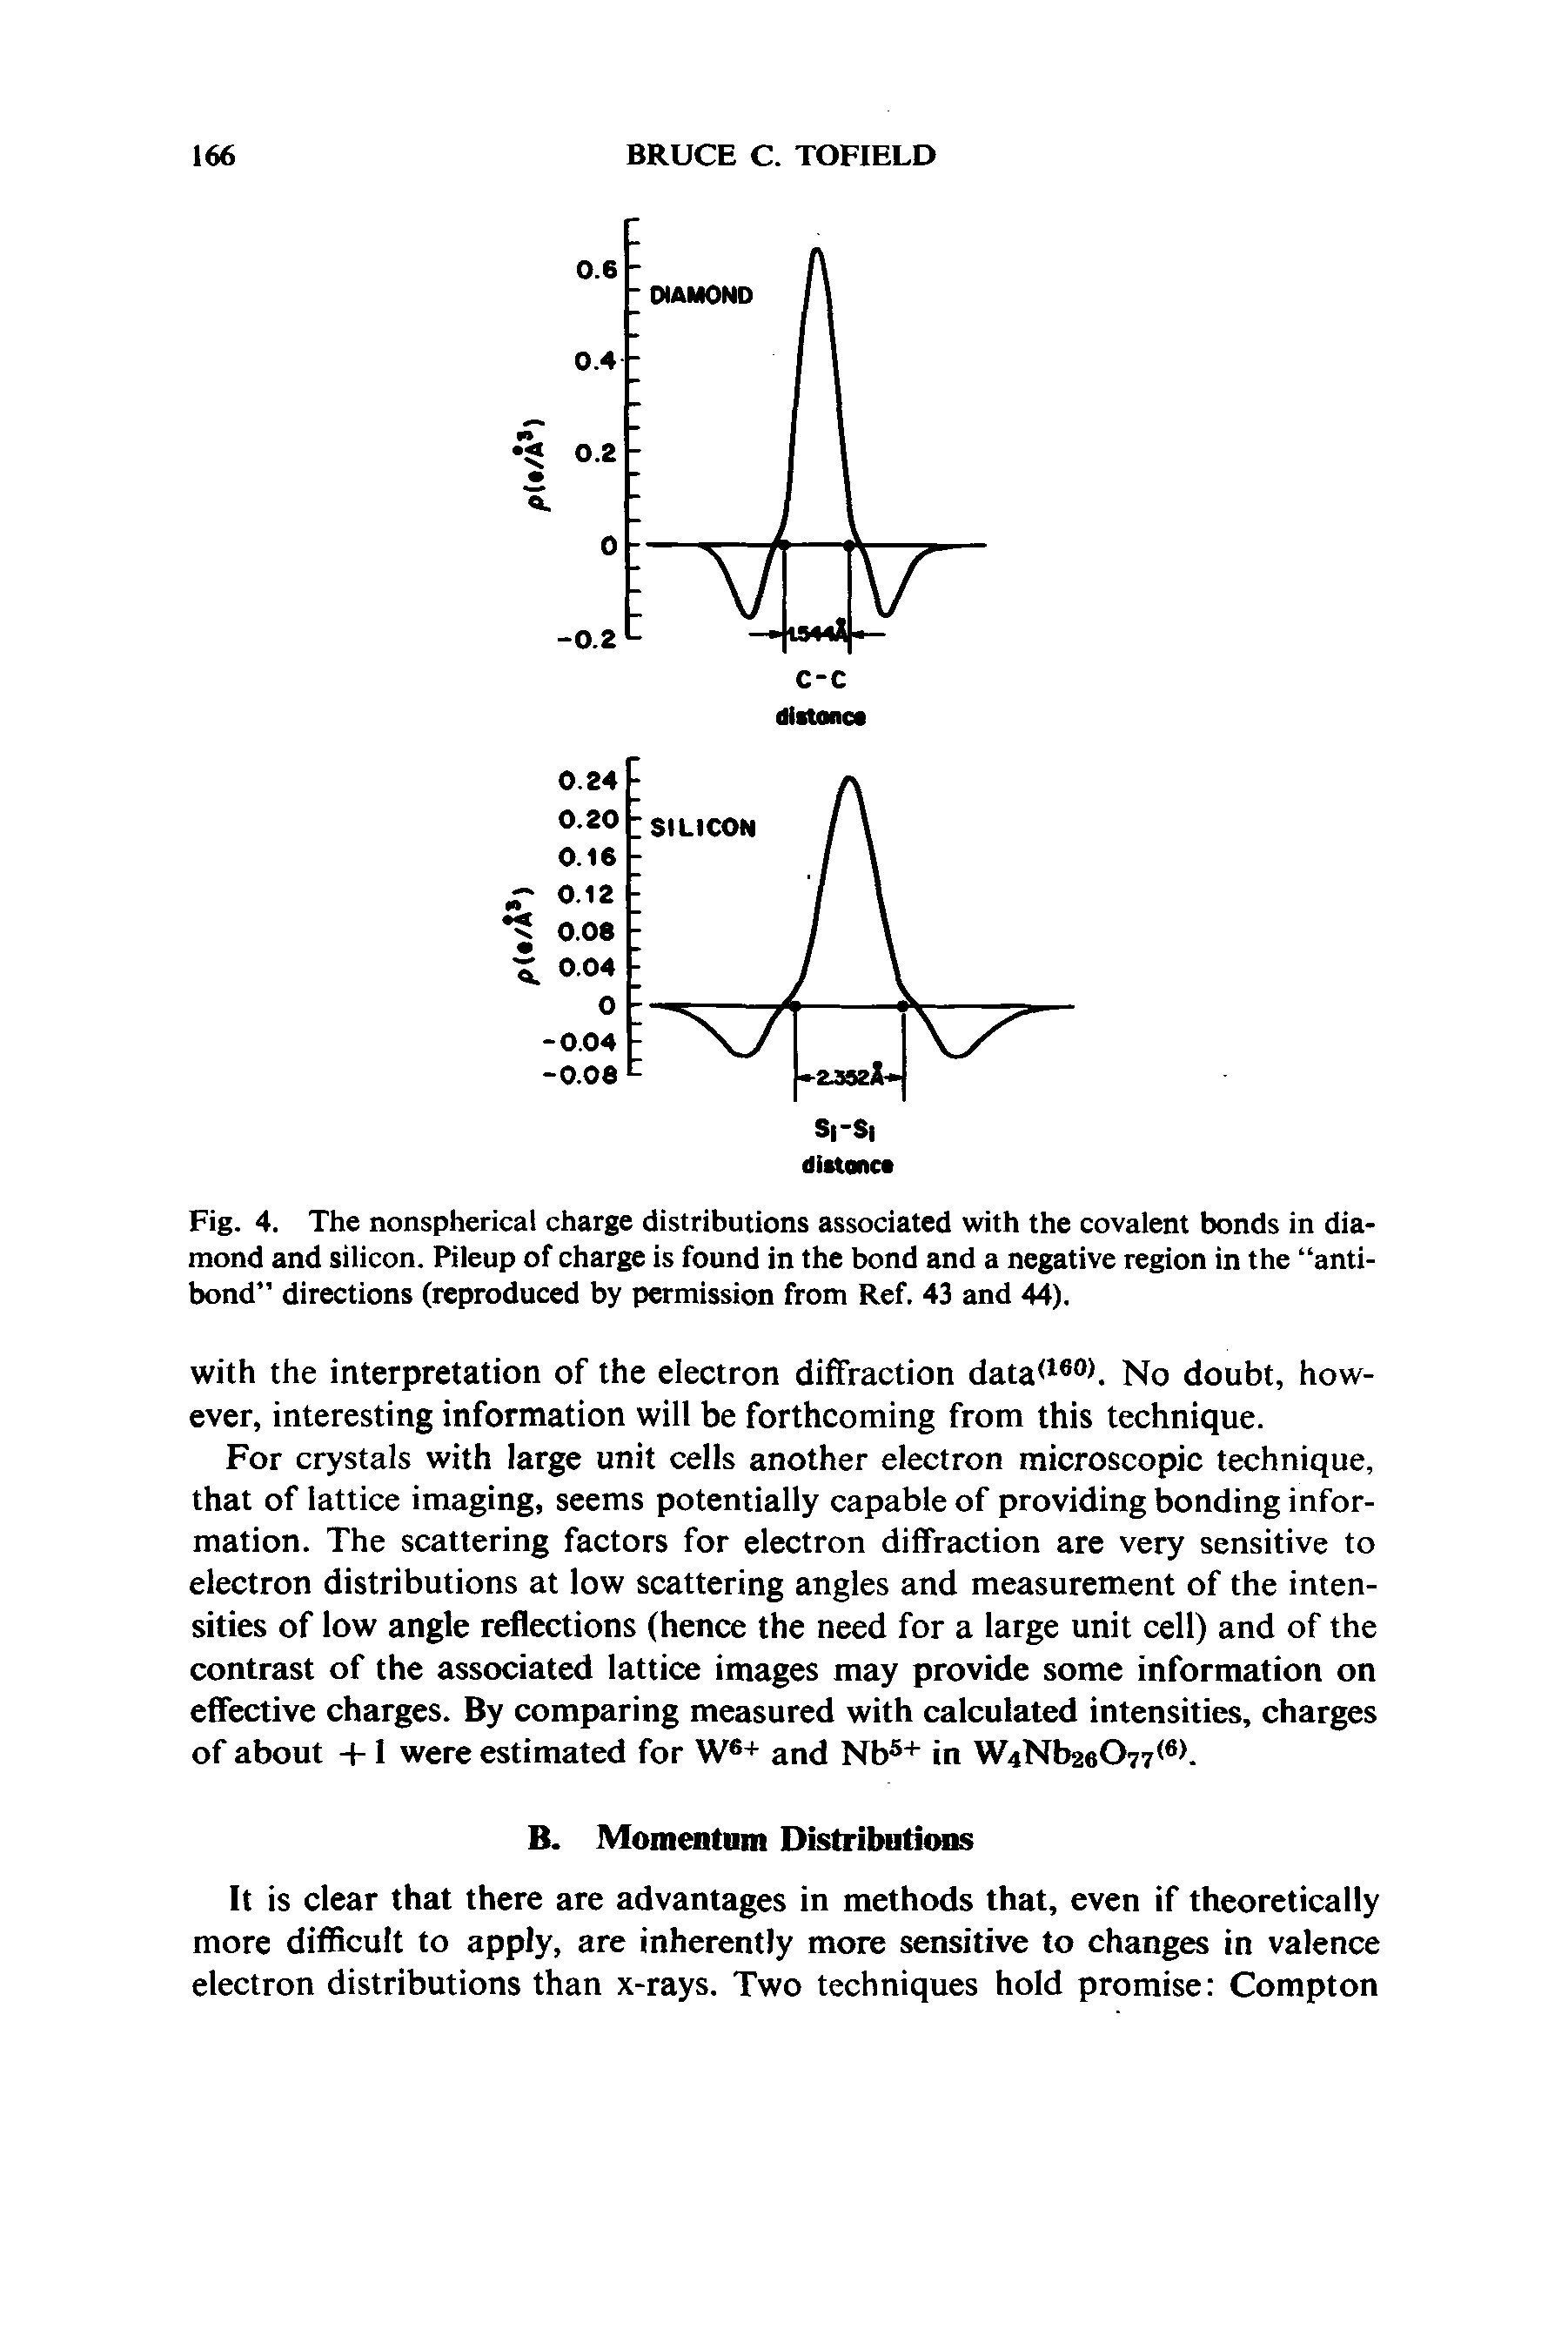 Fig. 4. The nonspherical charge distributions associated with the covalent bonds in diamond and silicon. Pileup of charge is found in the bond and a negative region in the antibond directions (reproduced by permission from Ref. 43 and 44).